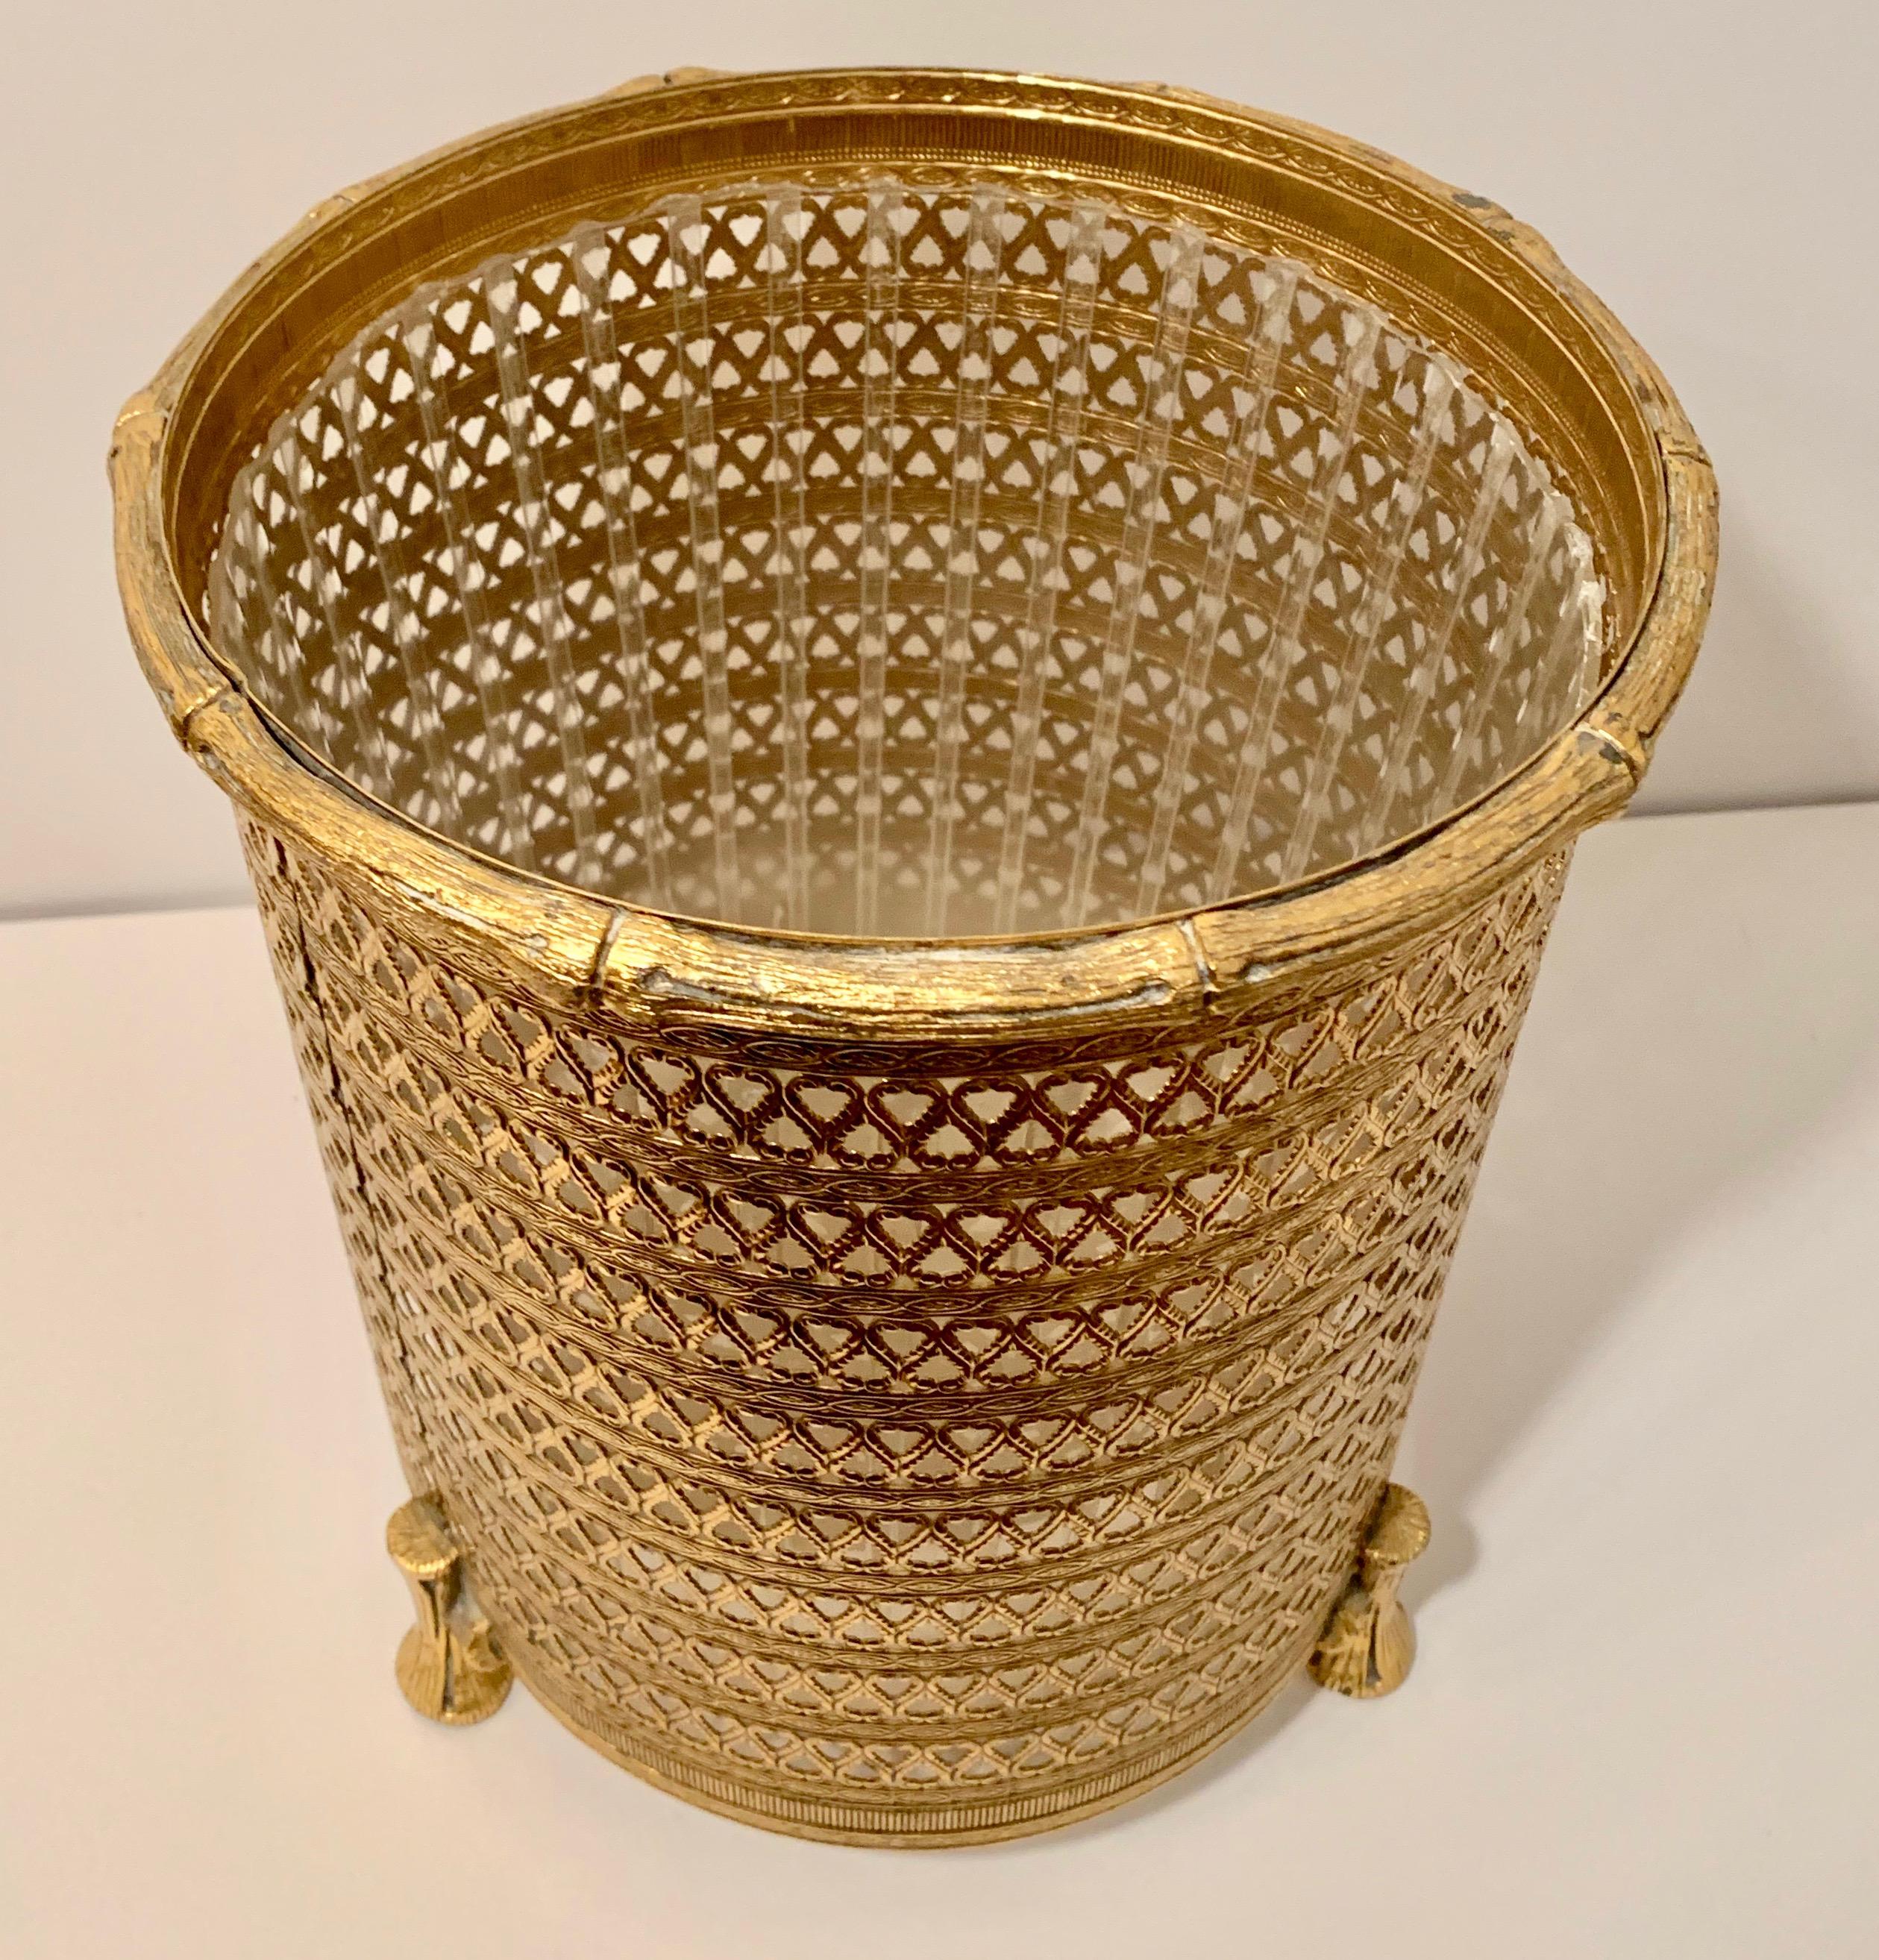 Italian Filagree brass waste bin with liner, a lovely shiny brass with bamboo accents on rim and feet, simple and elegant for any room, and wonderful for the office and bathroom. A plastic liner is nearly unable to see but makes removing trash easy